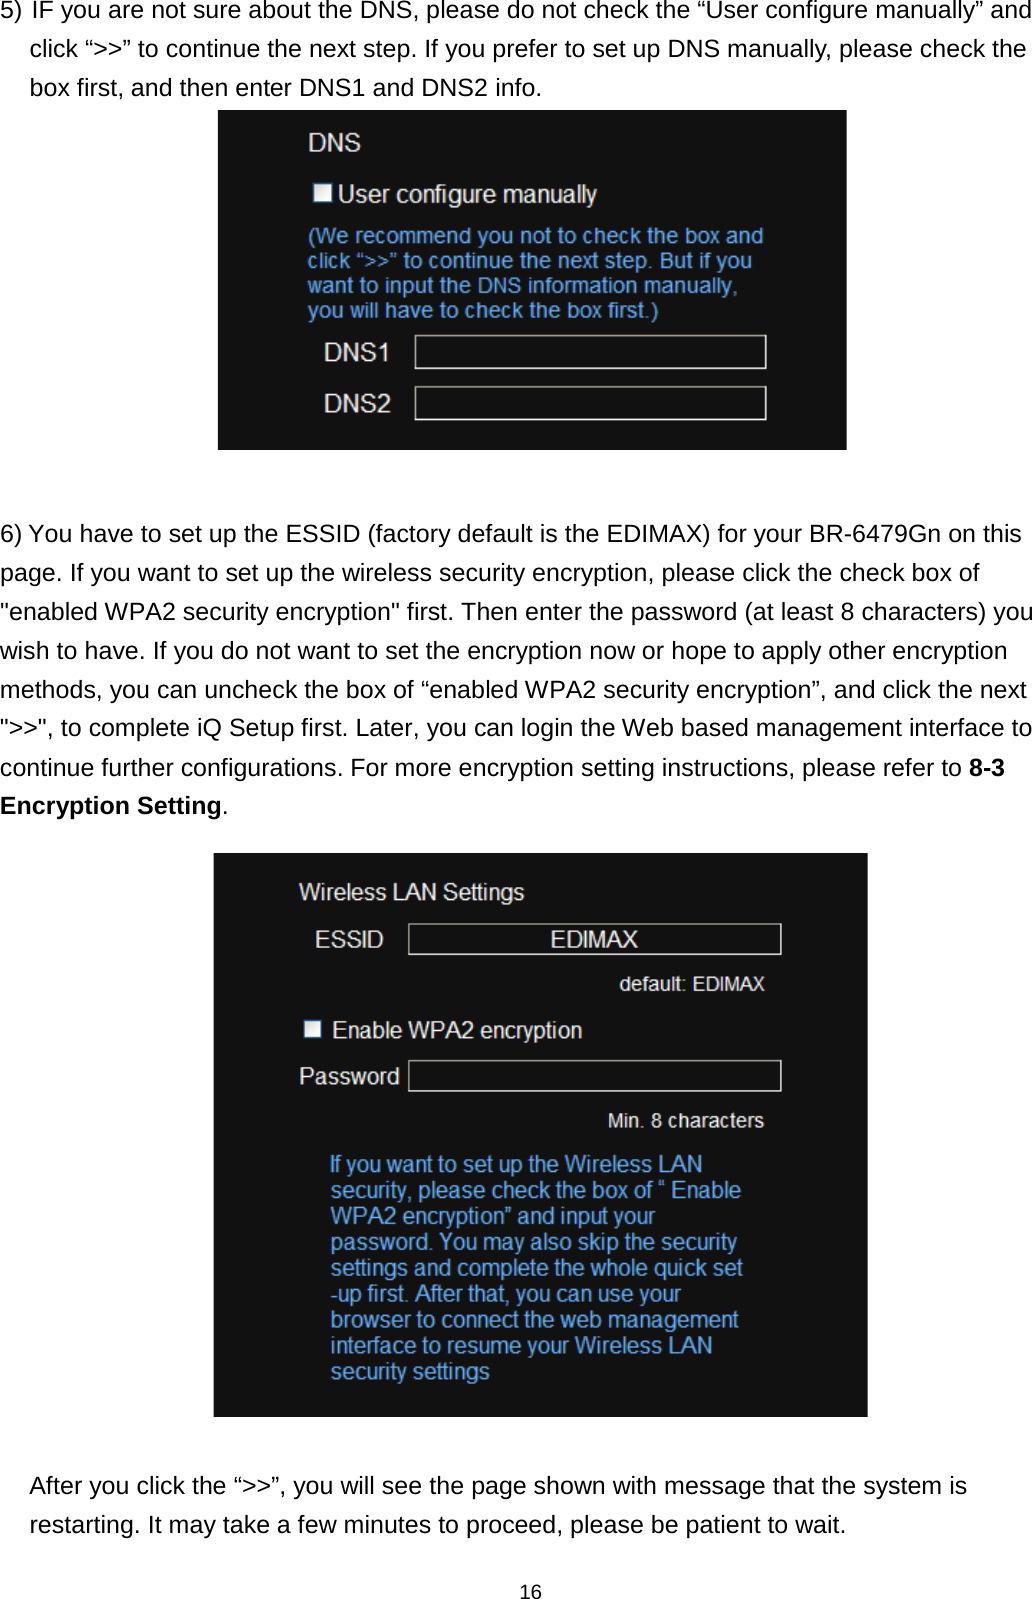 16  5) IF you are not sure about the DNS, please do not check the “User configure manually” and click “&gt;&gt;” to continue the next step. If you prefer to set up DNS manually, please check the box first, and then enter DNS1 and DNS2 info.   6) You have to set up the ESSID (factory default is the EDIMAX) for your BR-6479Gn on this page. If you want to set up the wireless security encryption, please click the check box of &quot;enabled WPA2 security encryption&quot; first. Then enter the password (at least 8 characters) you wish to have. If you do not want to set the encryption now or hope to apply other encryption methods, you can uncheck the box of “enabled WPA2 security encryption”, and click the next &quot;&gt;&gt;&quot;, to complete iQ Setup first. Later, you can login the Web based management interface to continue further configurations. For more encryption setting instructions, please refer to 8-3 Encryption Setting.   After you click the “&gt;&gt;”, you will see the page shown with message that the system is restarting. It may take a few minutes to proceed, please be patient to wait. 